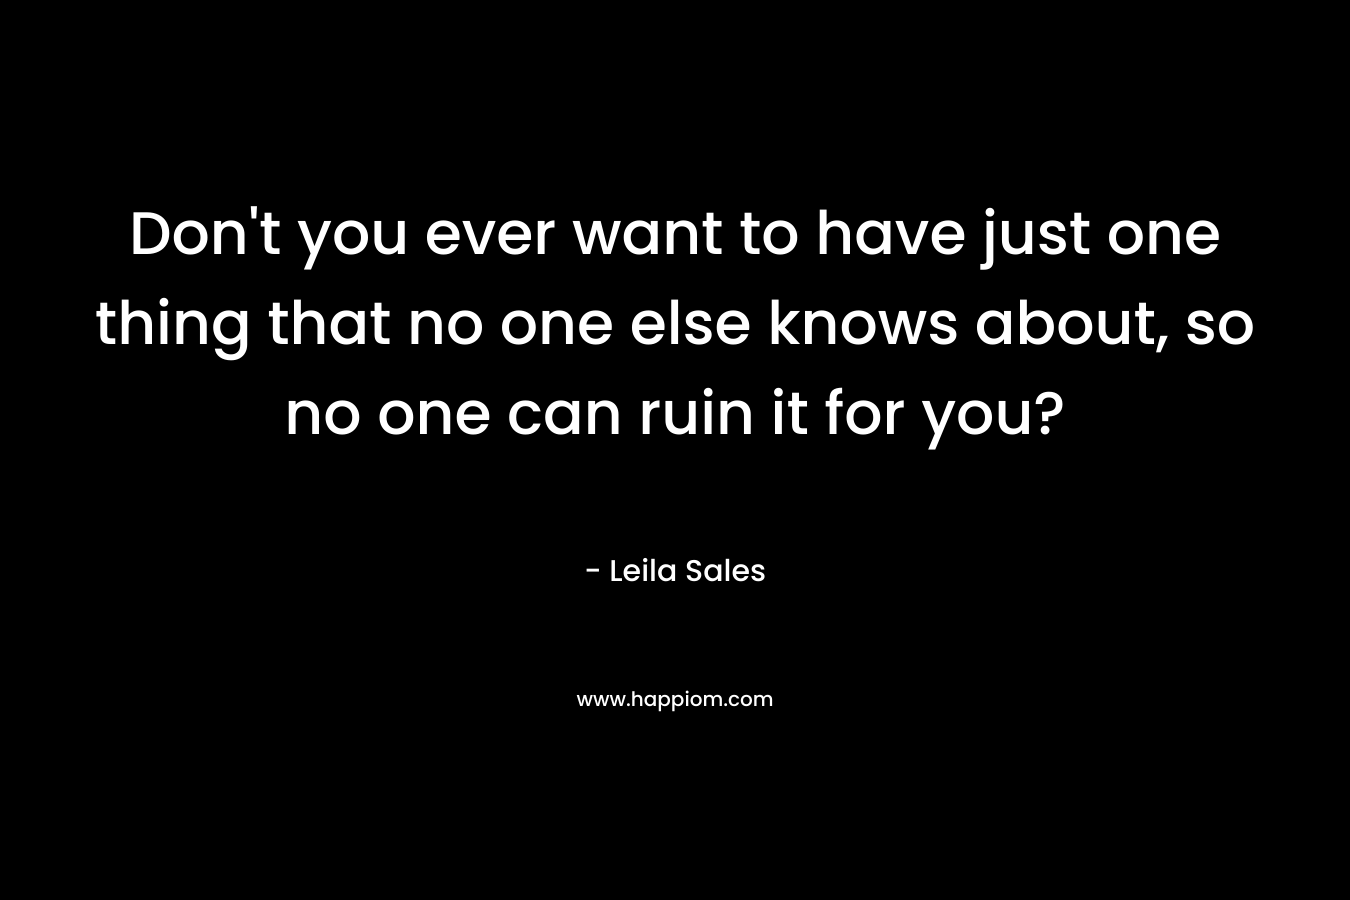 Don’t you ever want to have just one thing that no one else knows about, so no one can ruin it for you? – Leila Sales